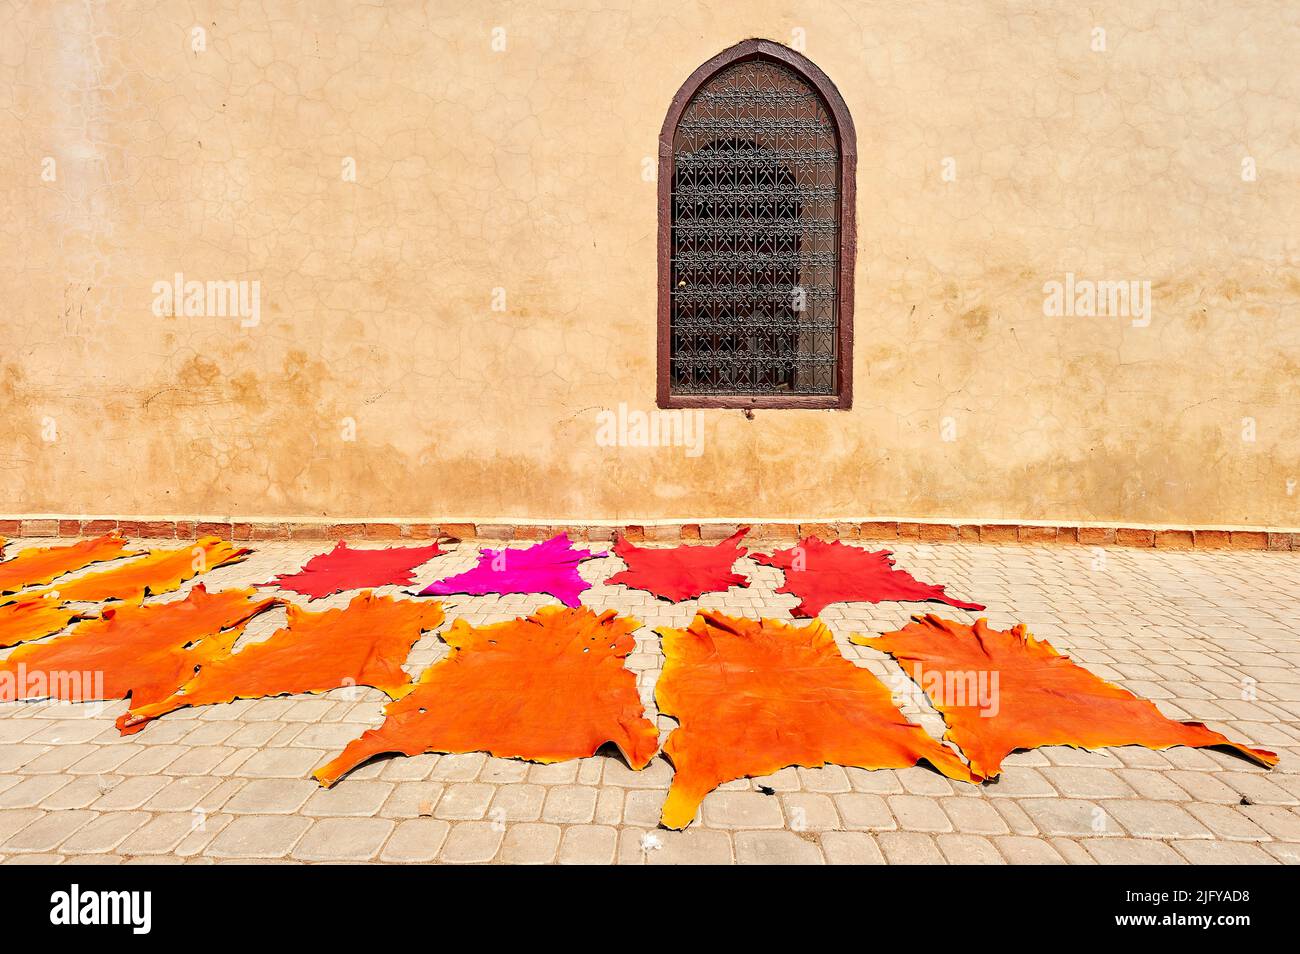 Morocco Marrakesh. Dyed leather drying in the sun Stock Photo